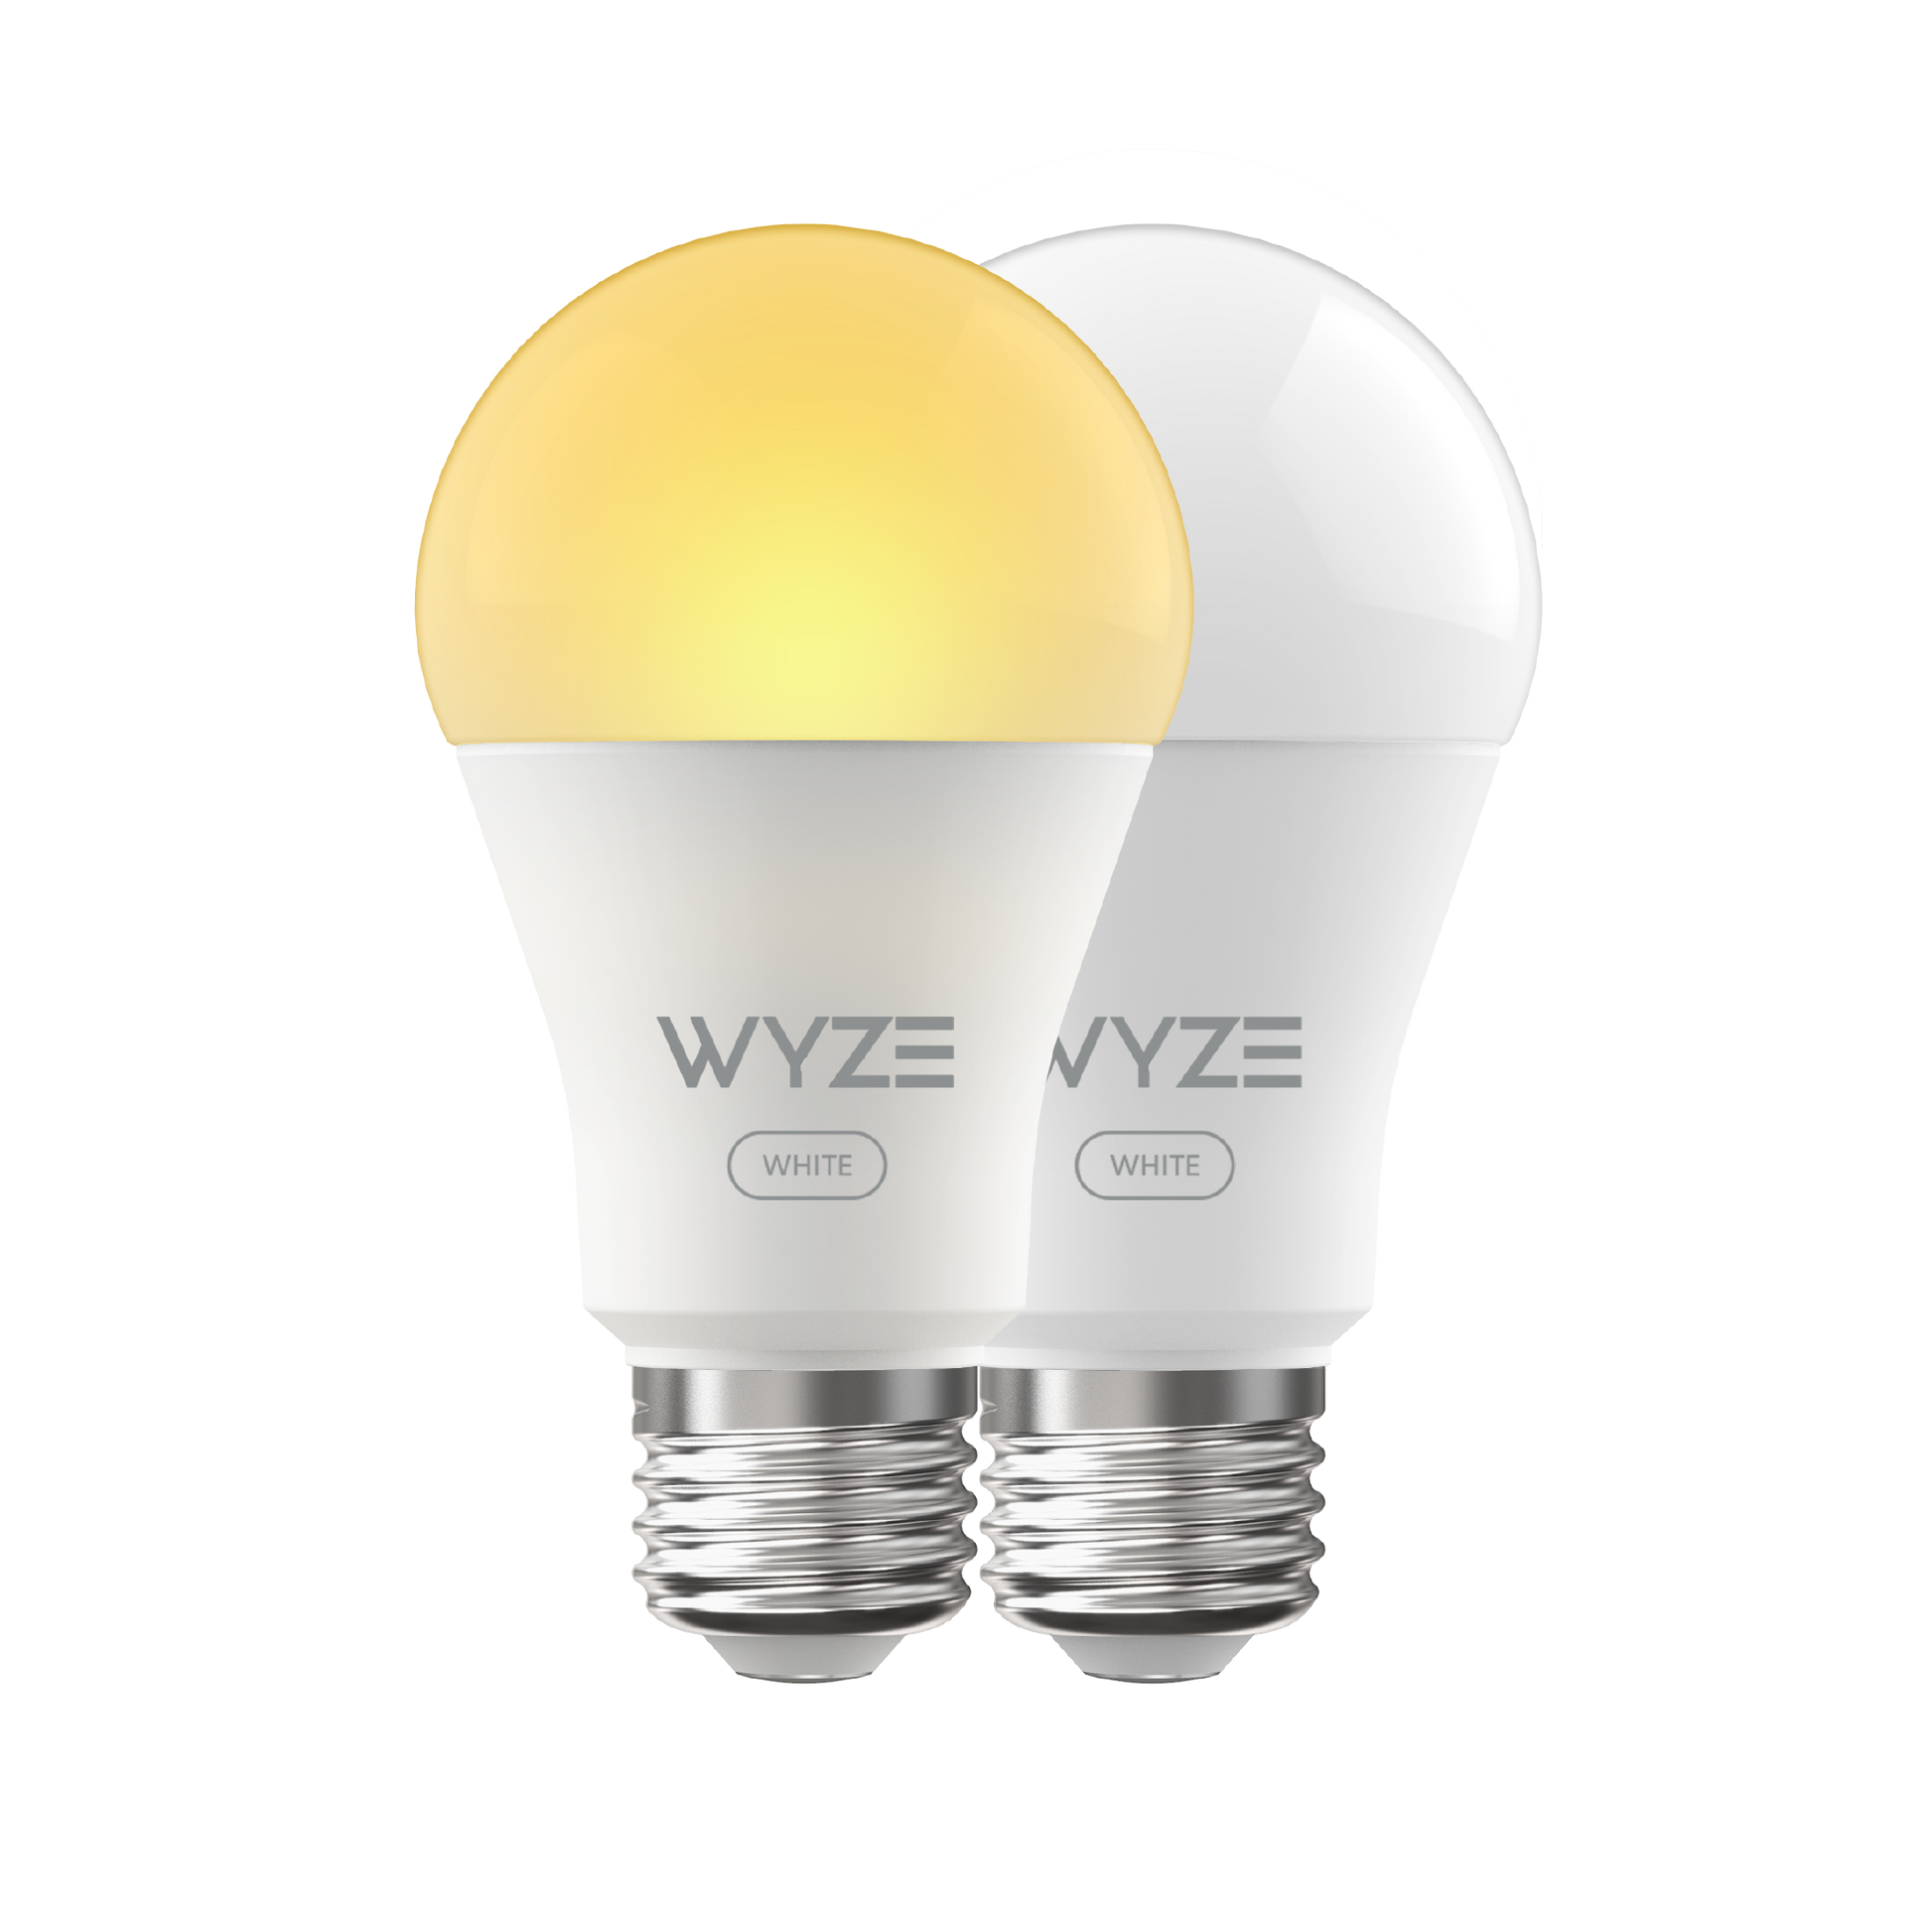 Philips Hue Goes After Wyze, Nest With New Line of Smart Cameras